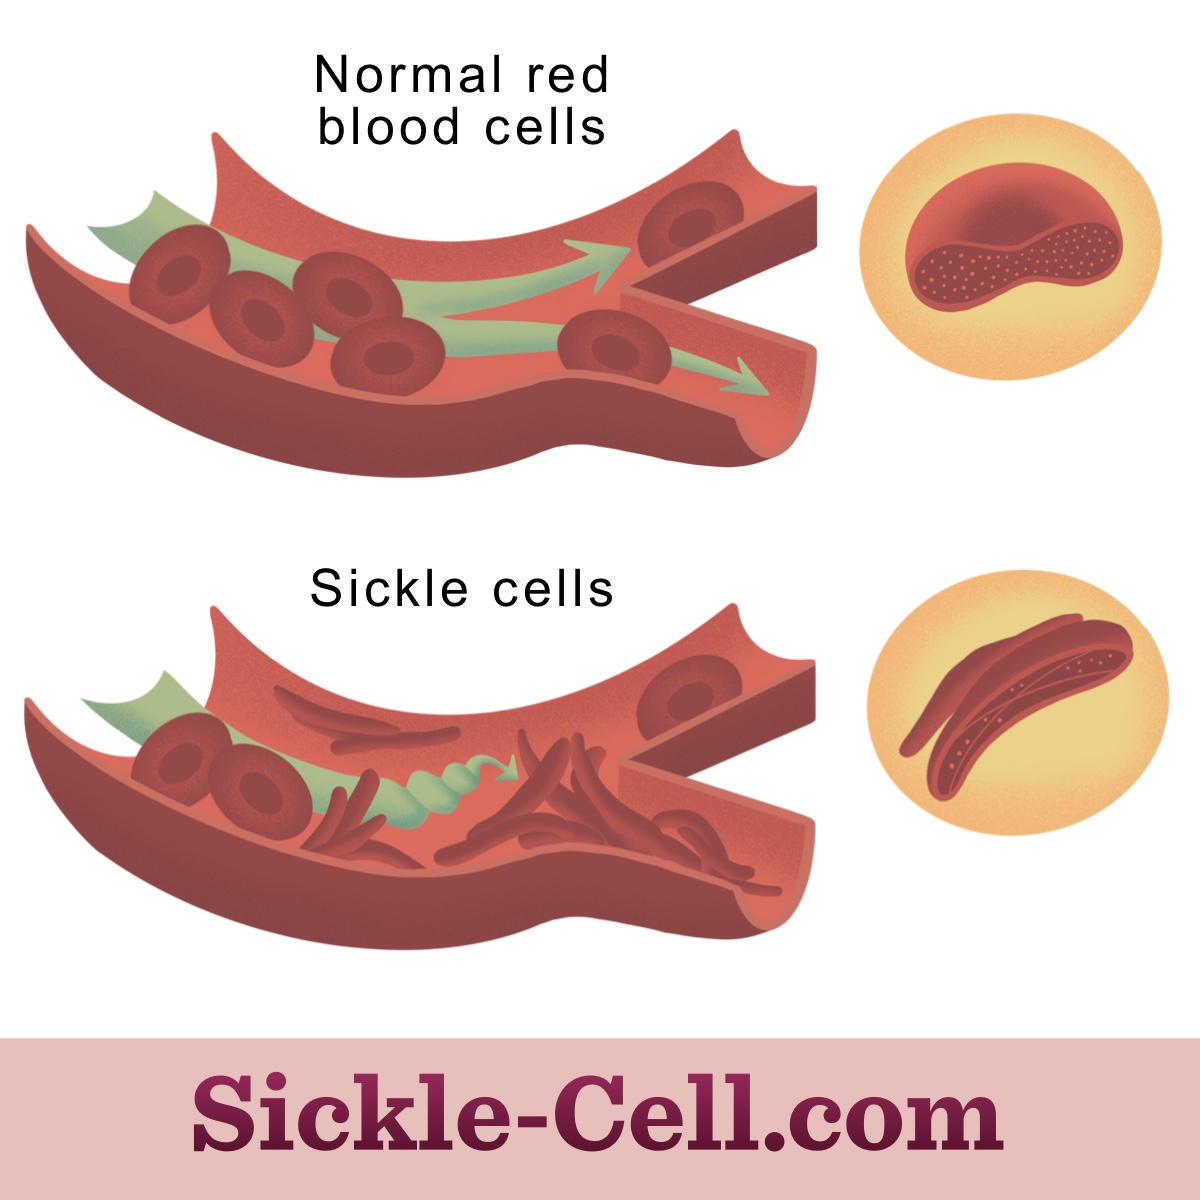 Sickle cells are crescent shaped due to rigid hemoglobin molecules. These sickle cells can cause blood vessels to be blocked.